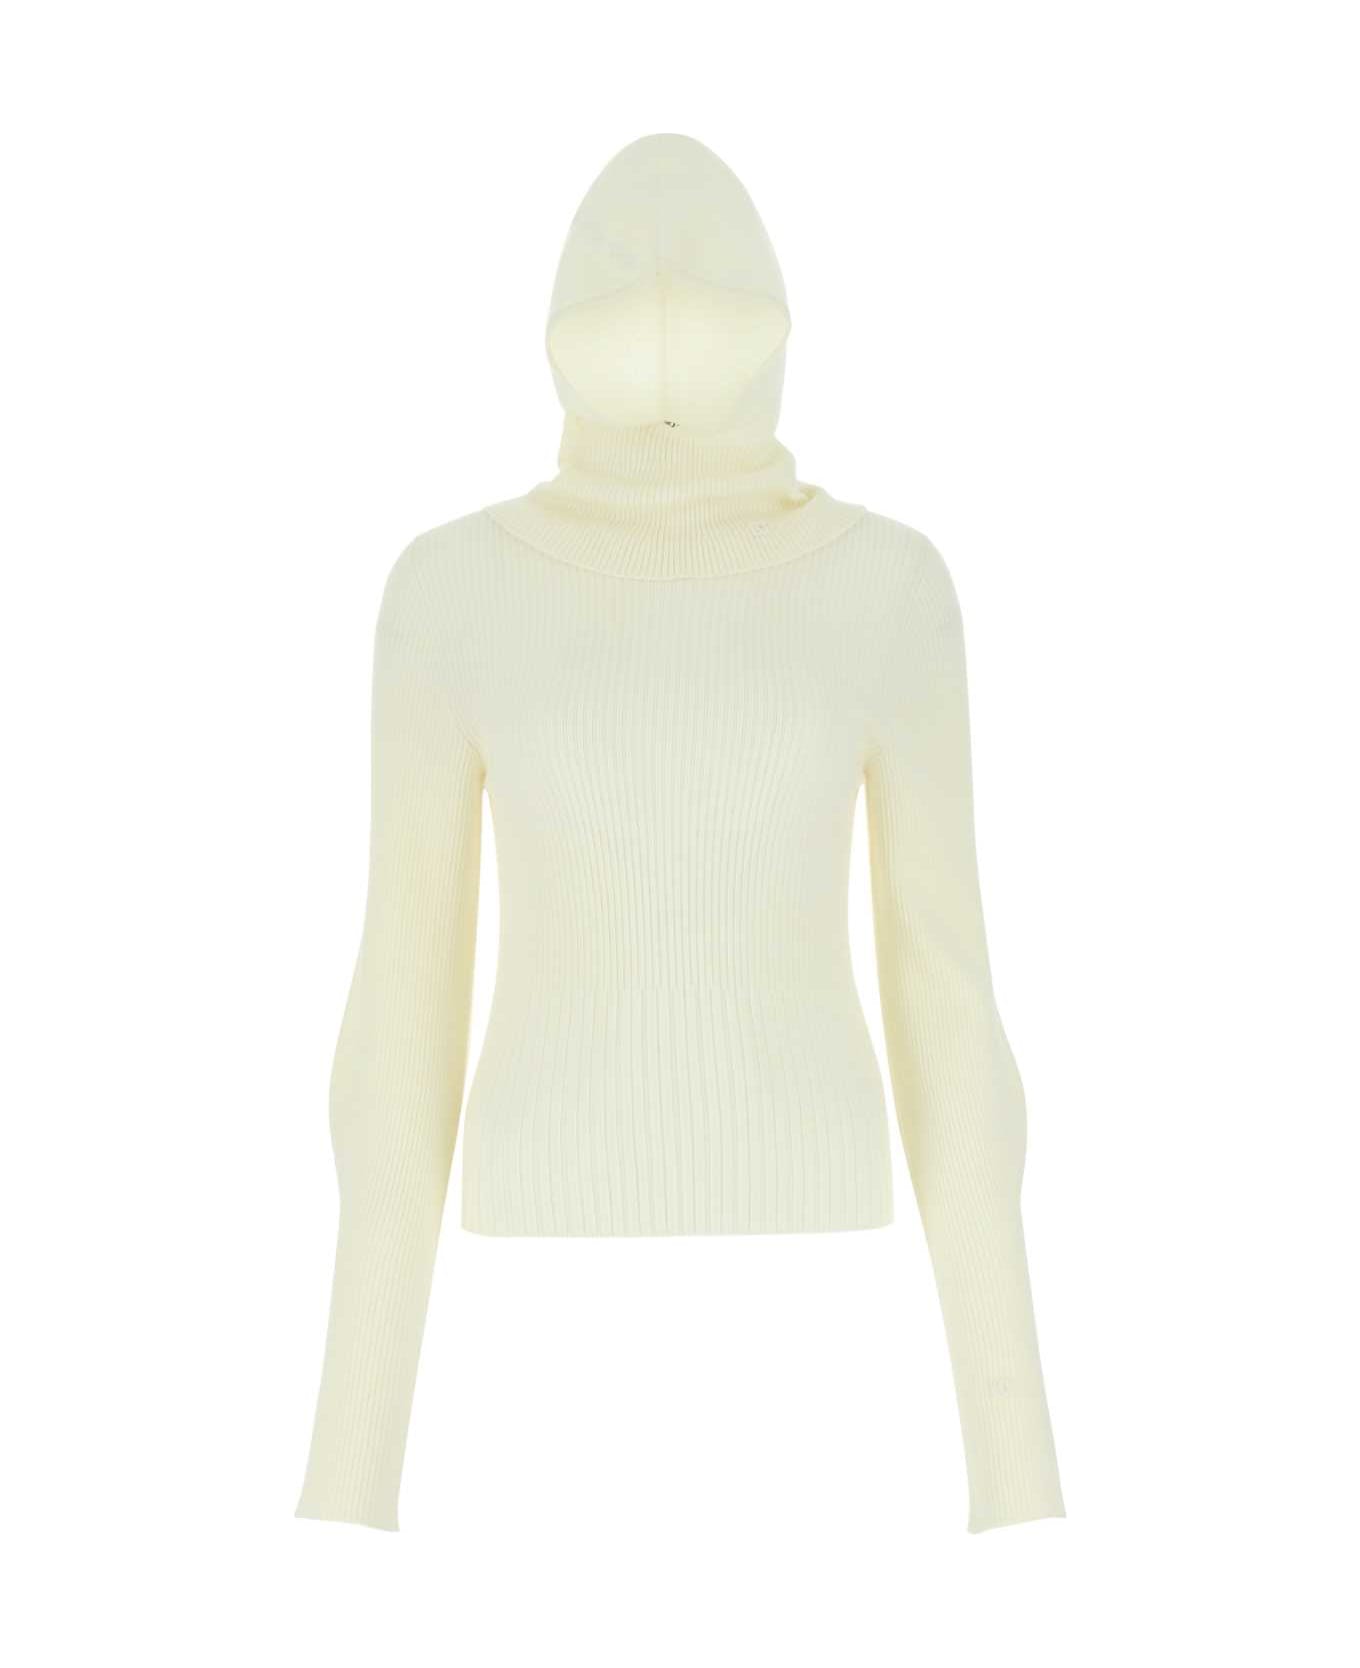 Low Classic Ivory Wool Sweater - 0060